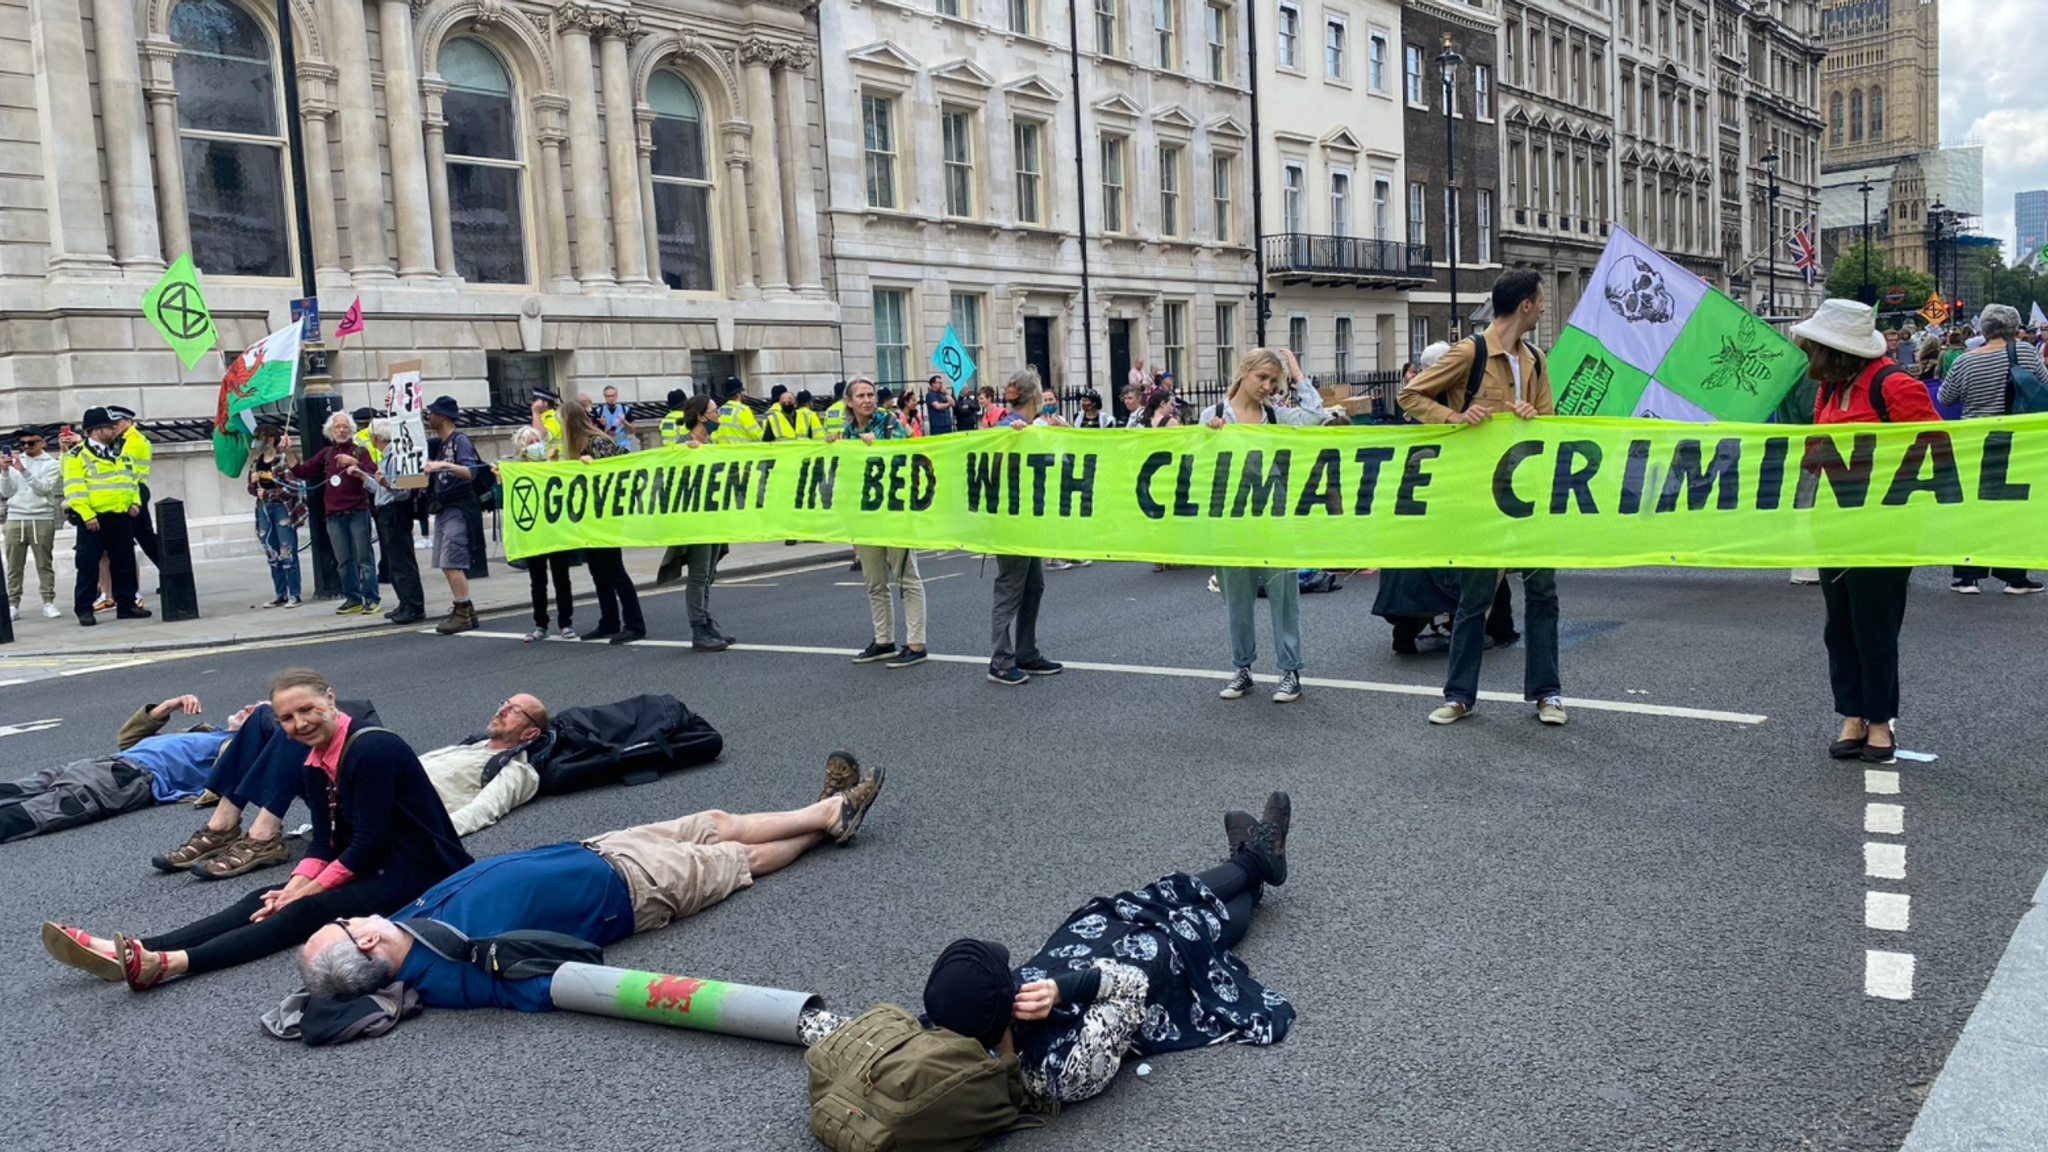 Extinction Rebellion: Police responding to protesters who have blocked  roads around Westminster | UK News | Sky News